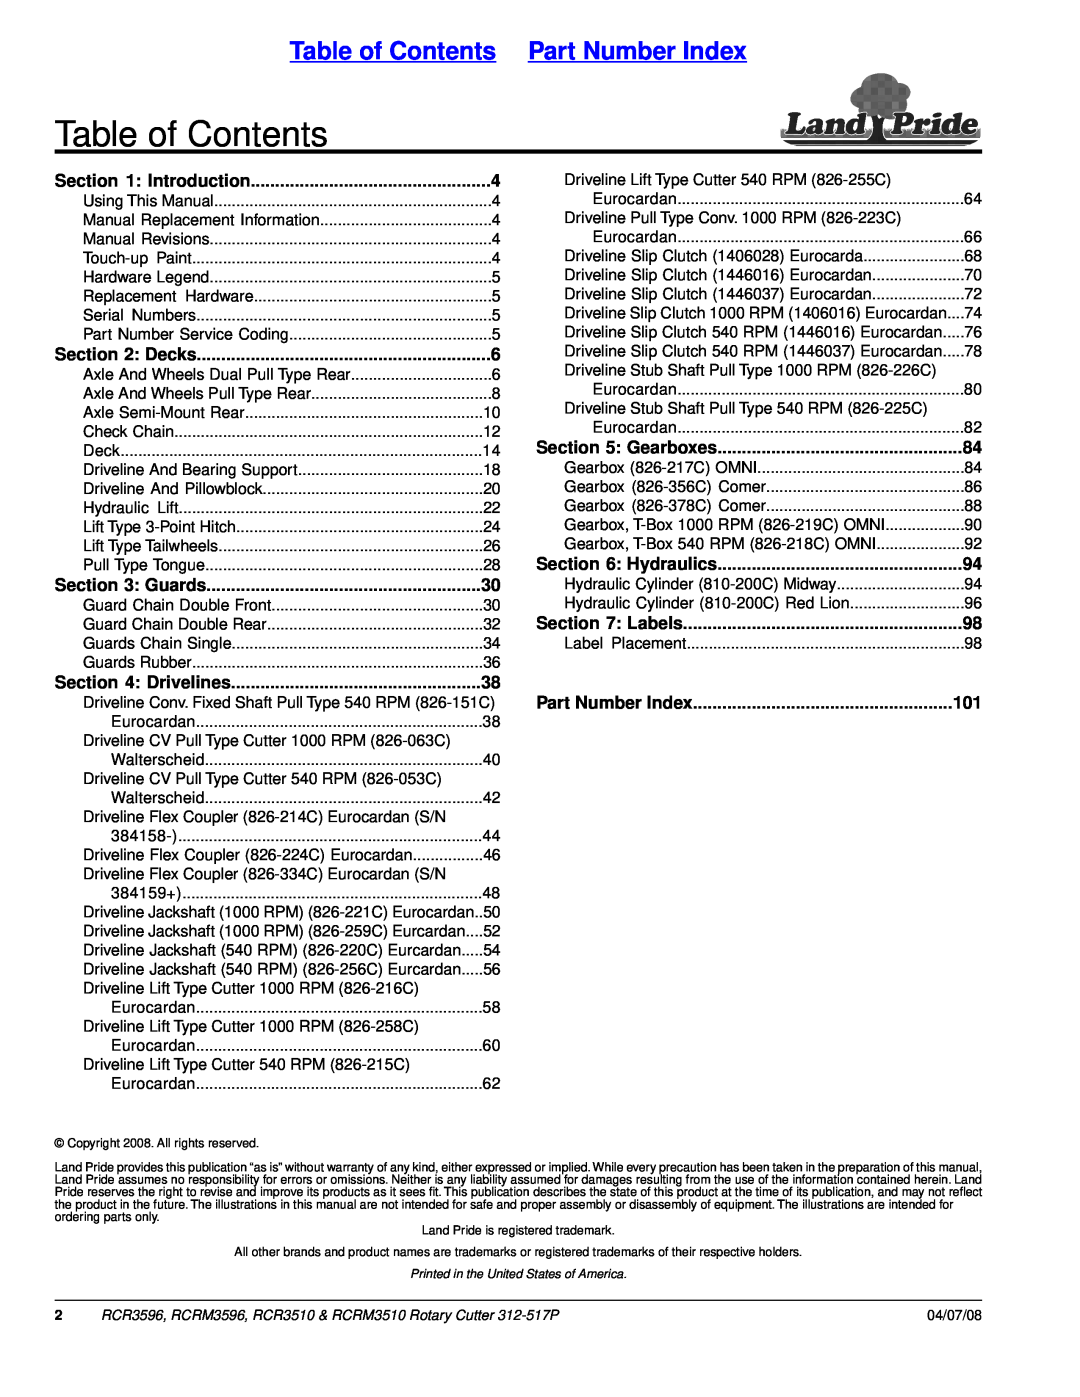 Land Pride RCRM3596 Table of Contents Part Number Index, Introduction, Decks, Guards, Drivelines, Gearboxes, Labels 